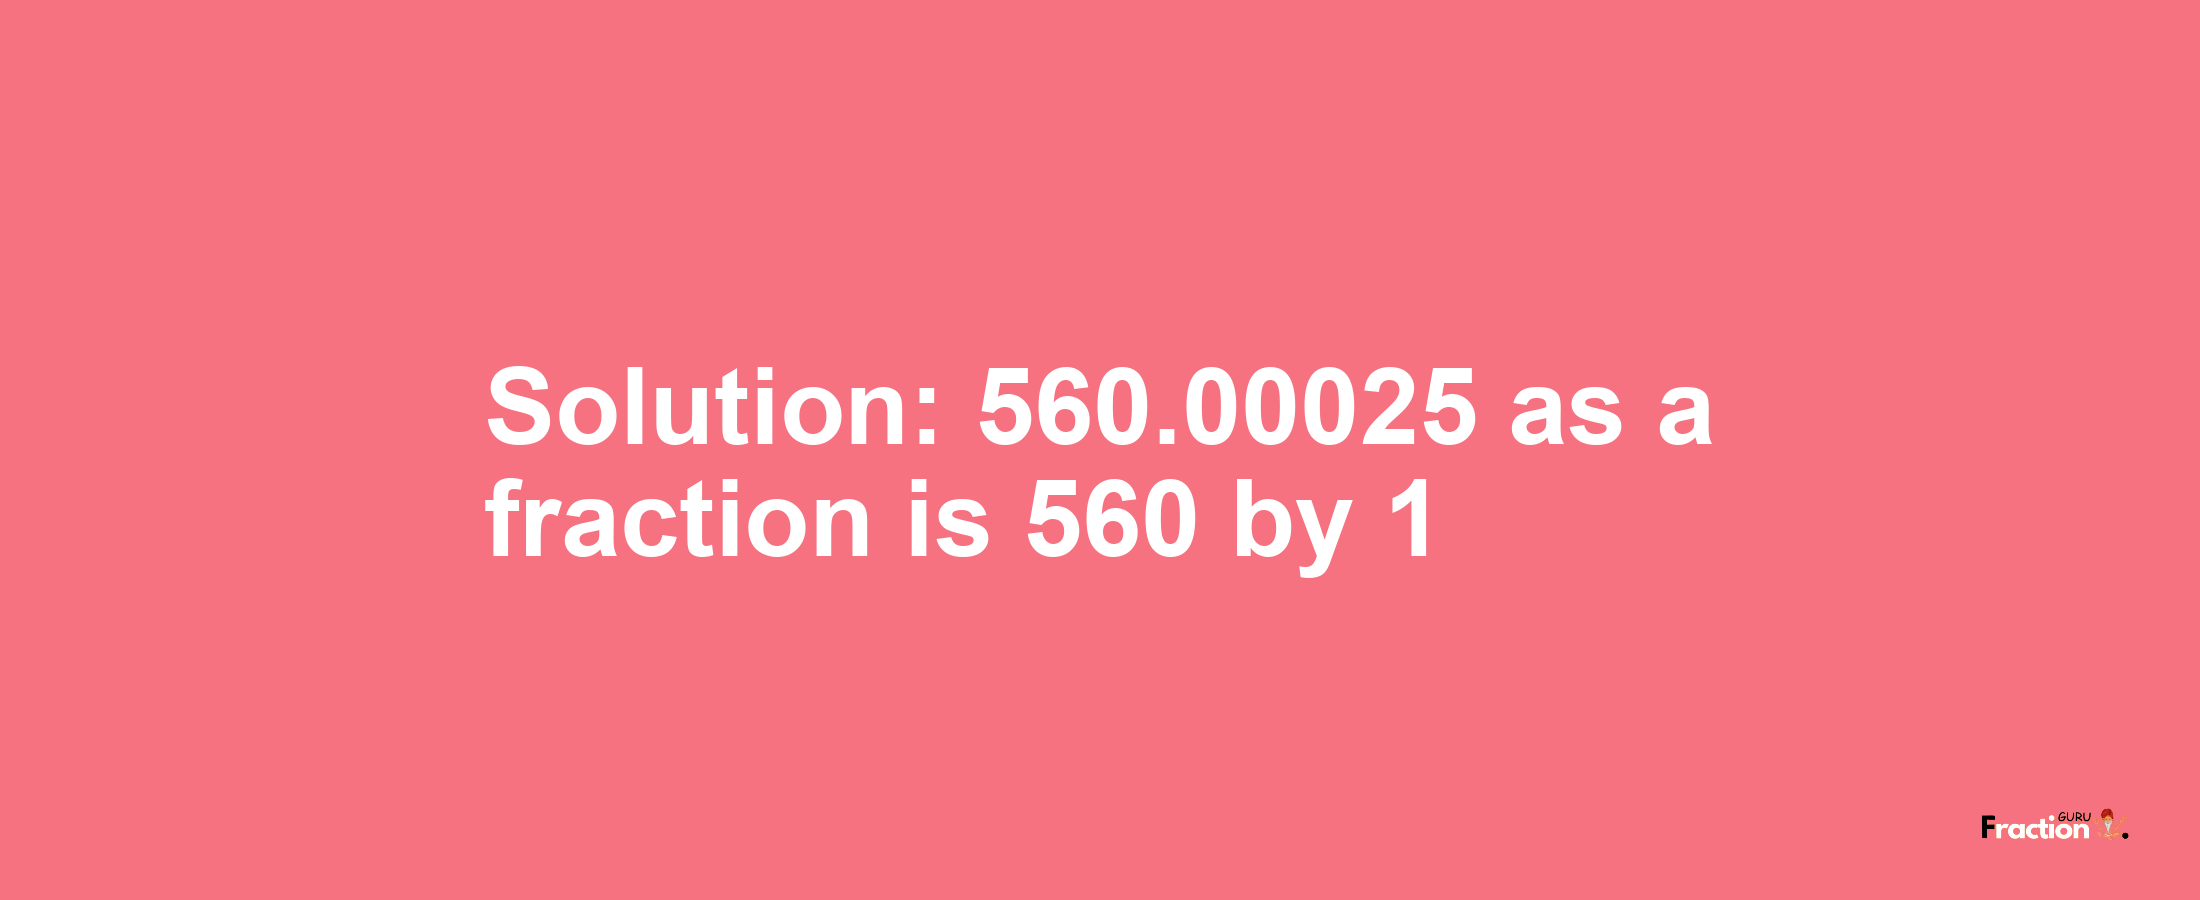 Solution:560.00025 as a fraction is 560/1